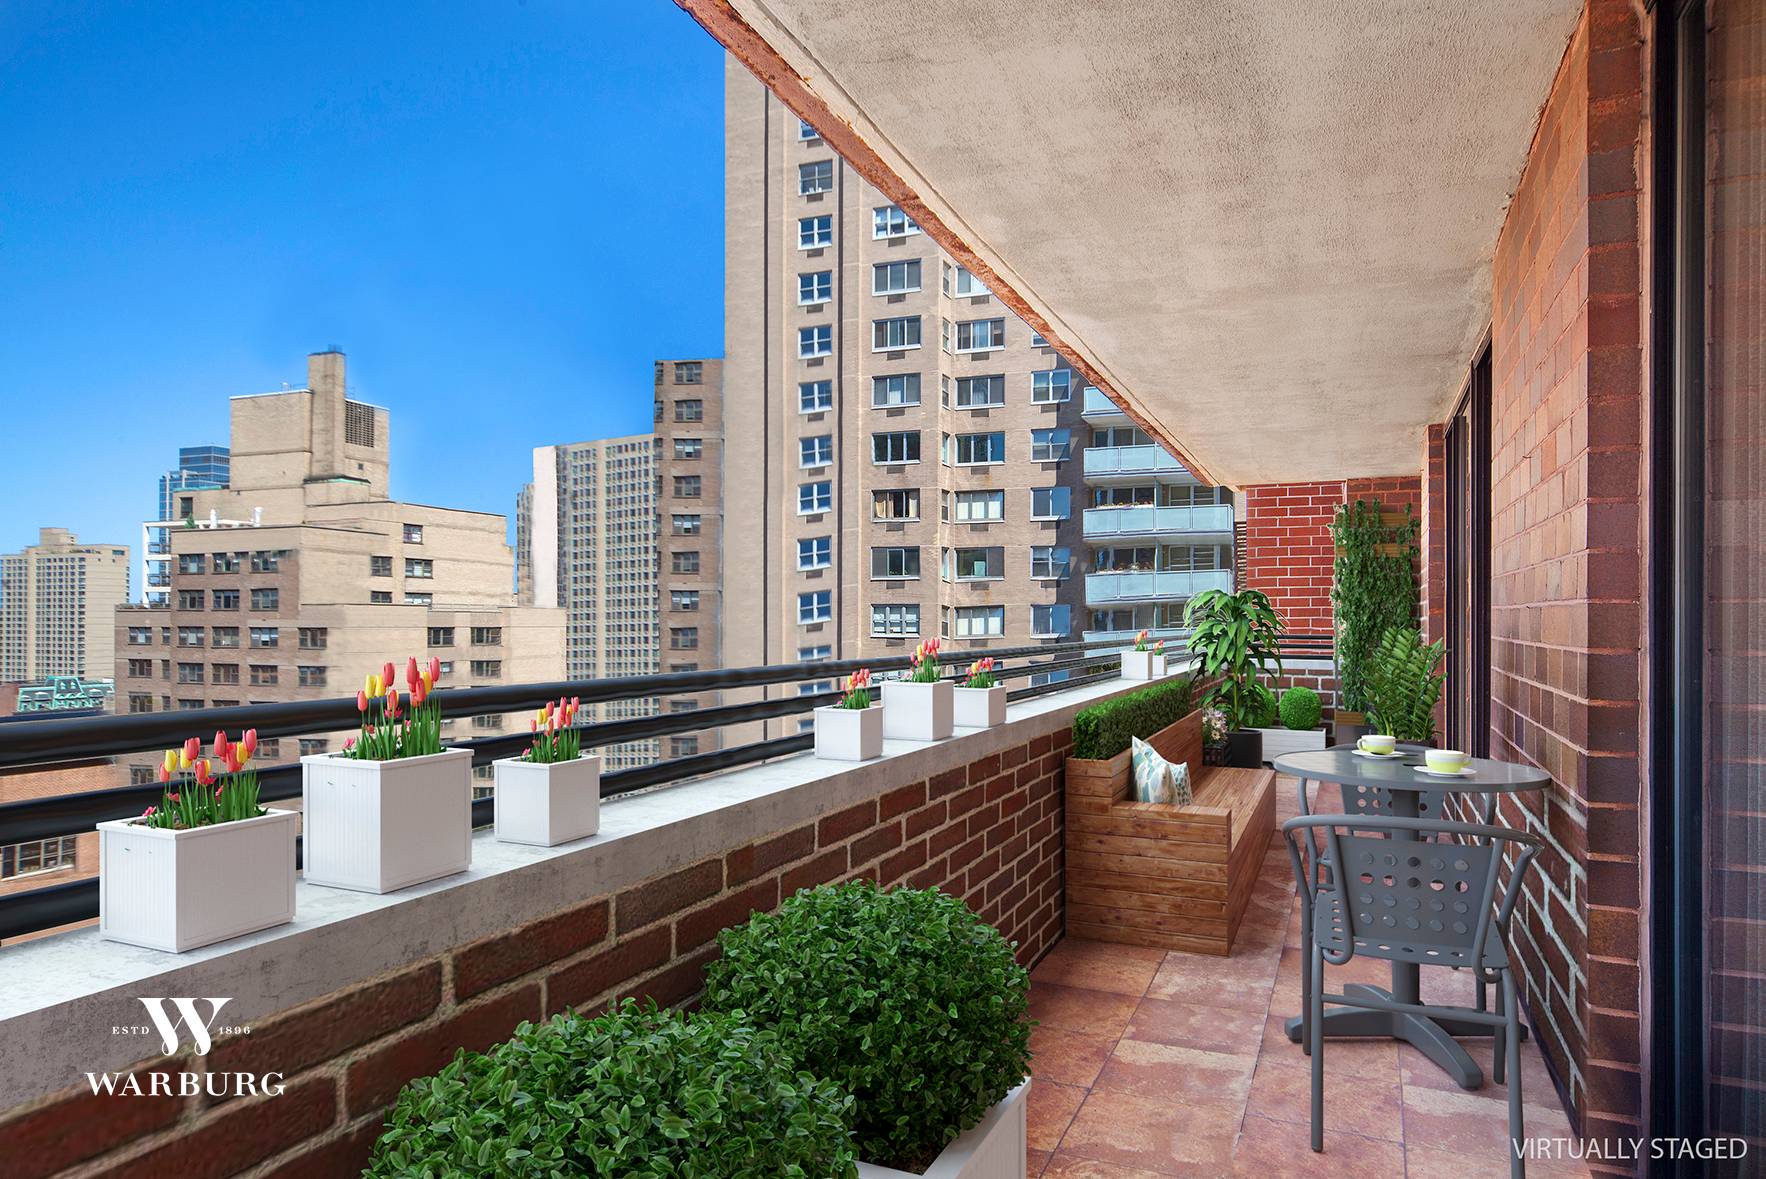 Having a terrace in New York is a true luxury especially one with sweeping, unobstructed and skyline views north, east and west of the city.